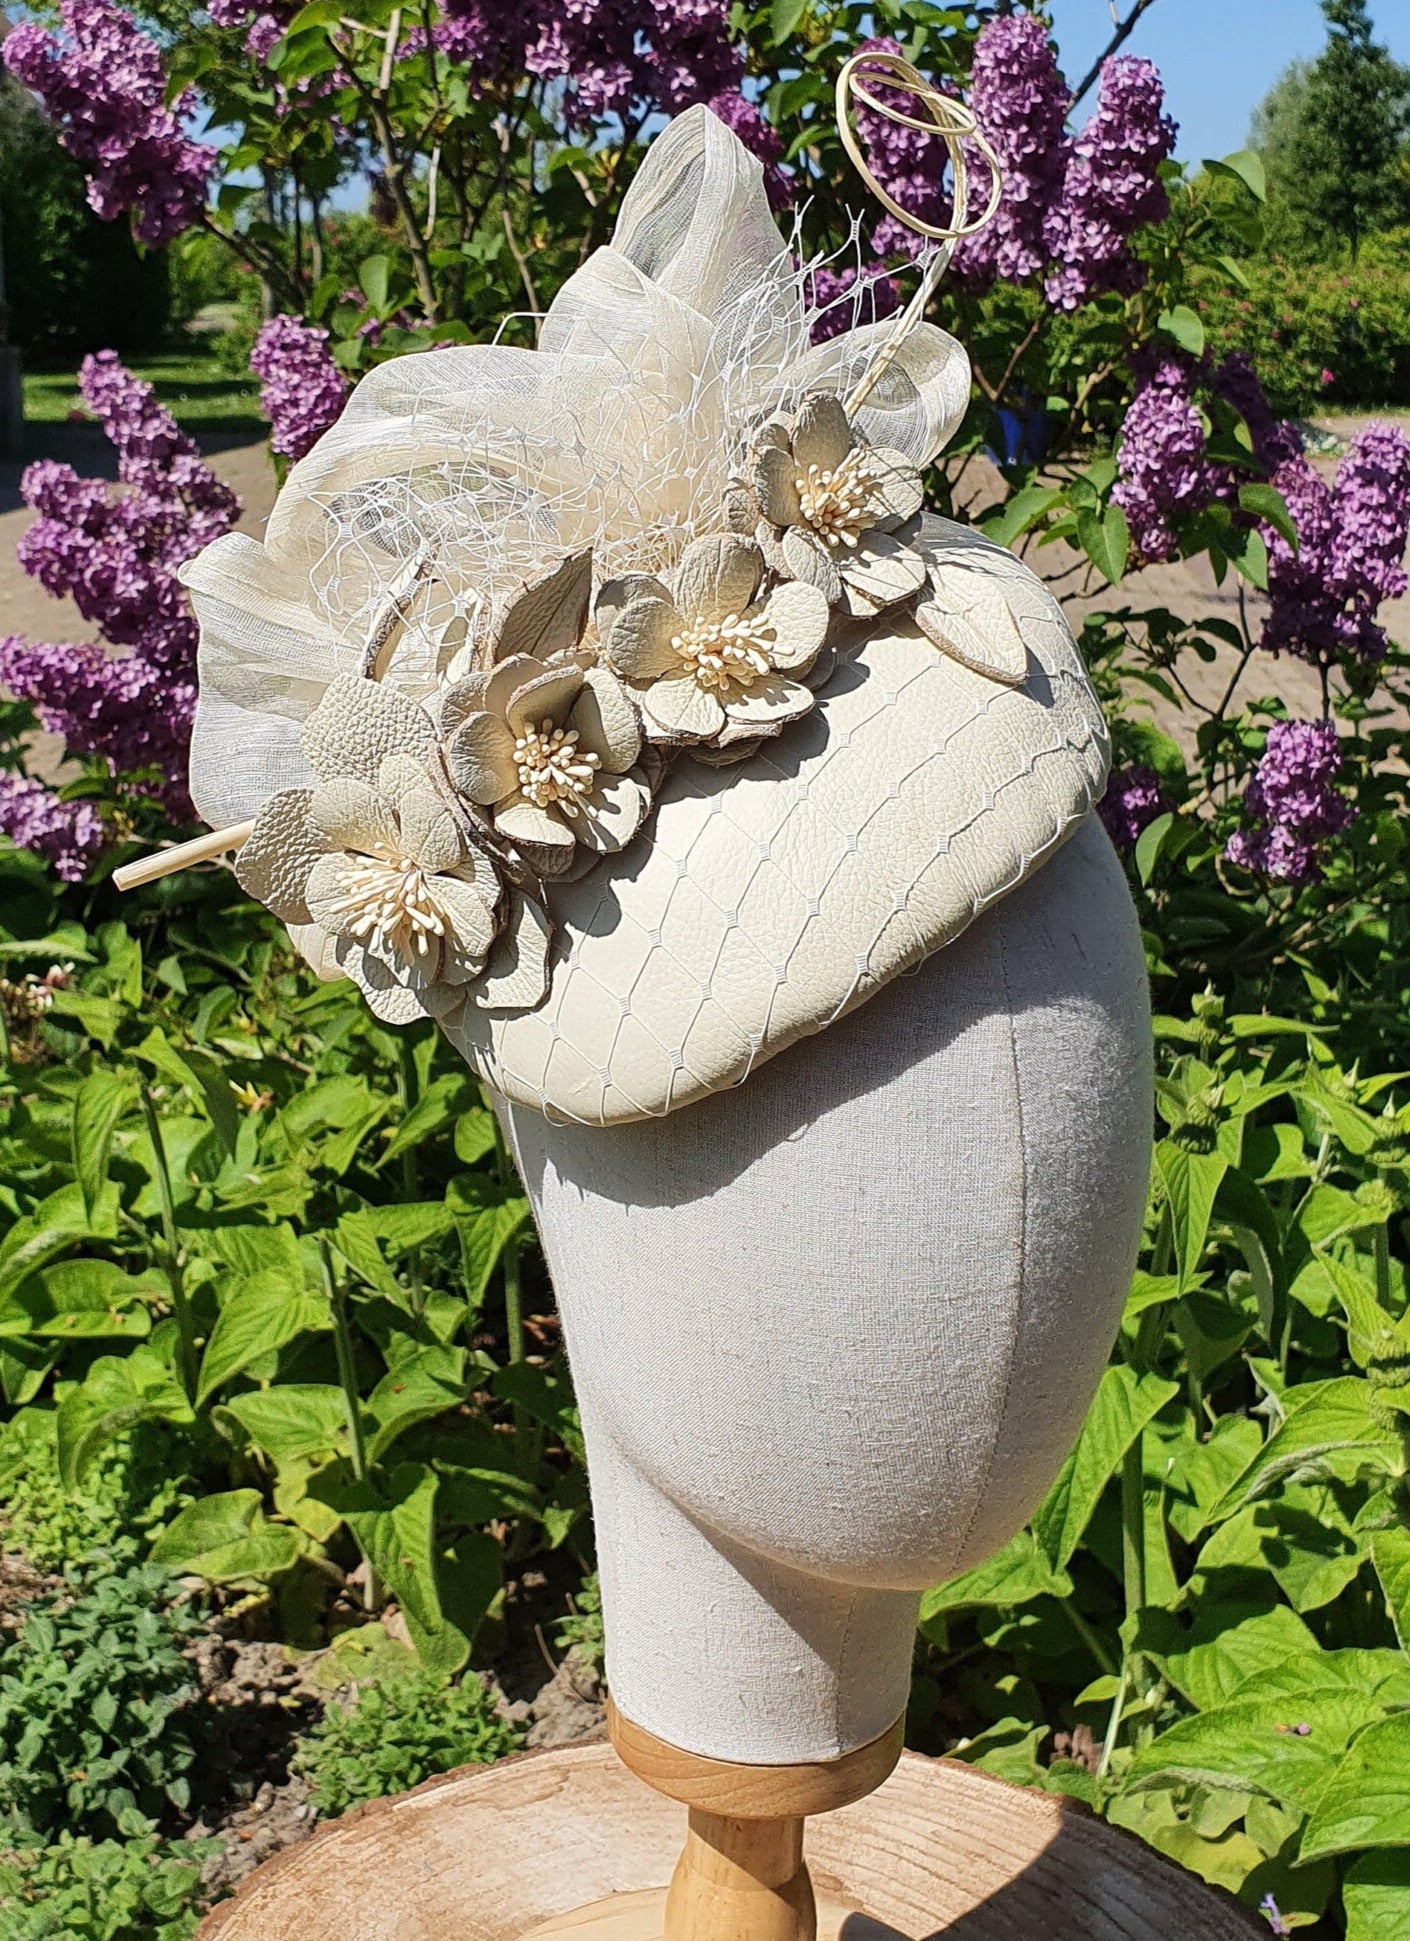 Handmade fascinator beige with ostrich with abaca silk and natural leather, elegant women's wedding hat for special occasion